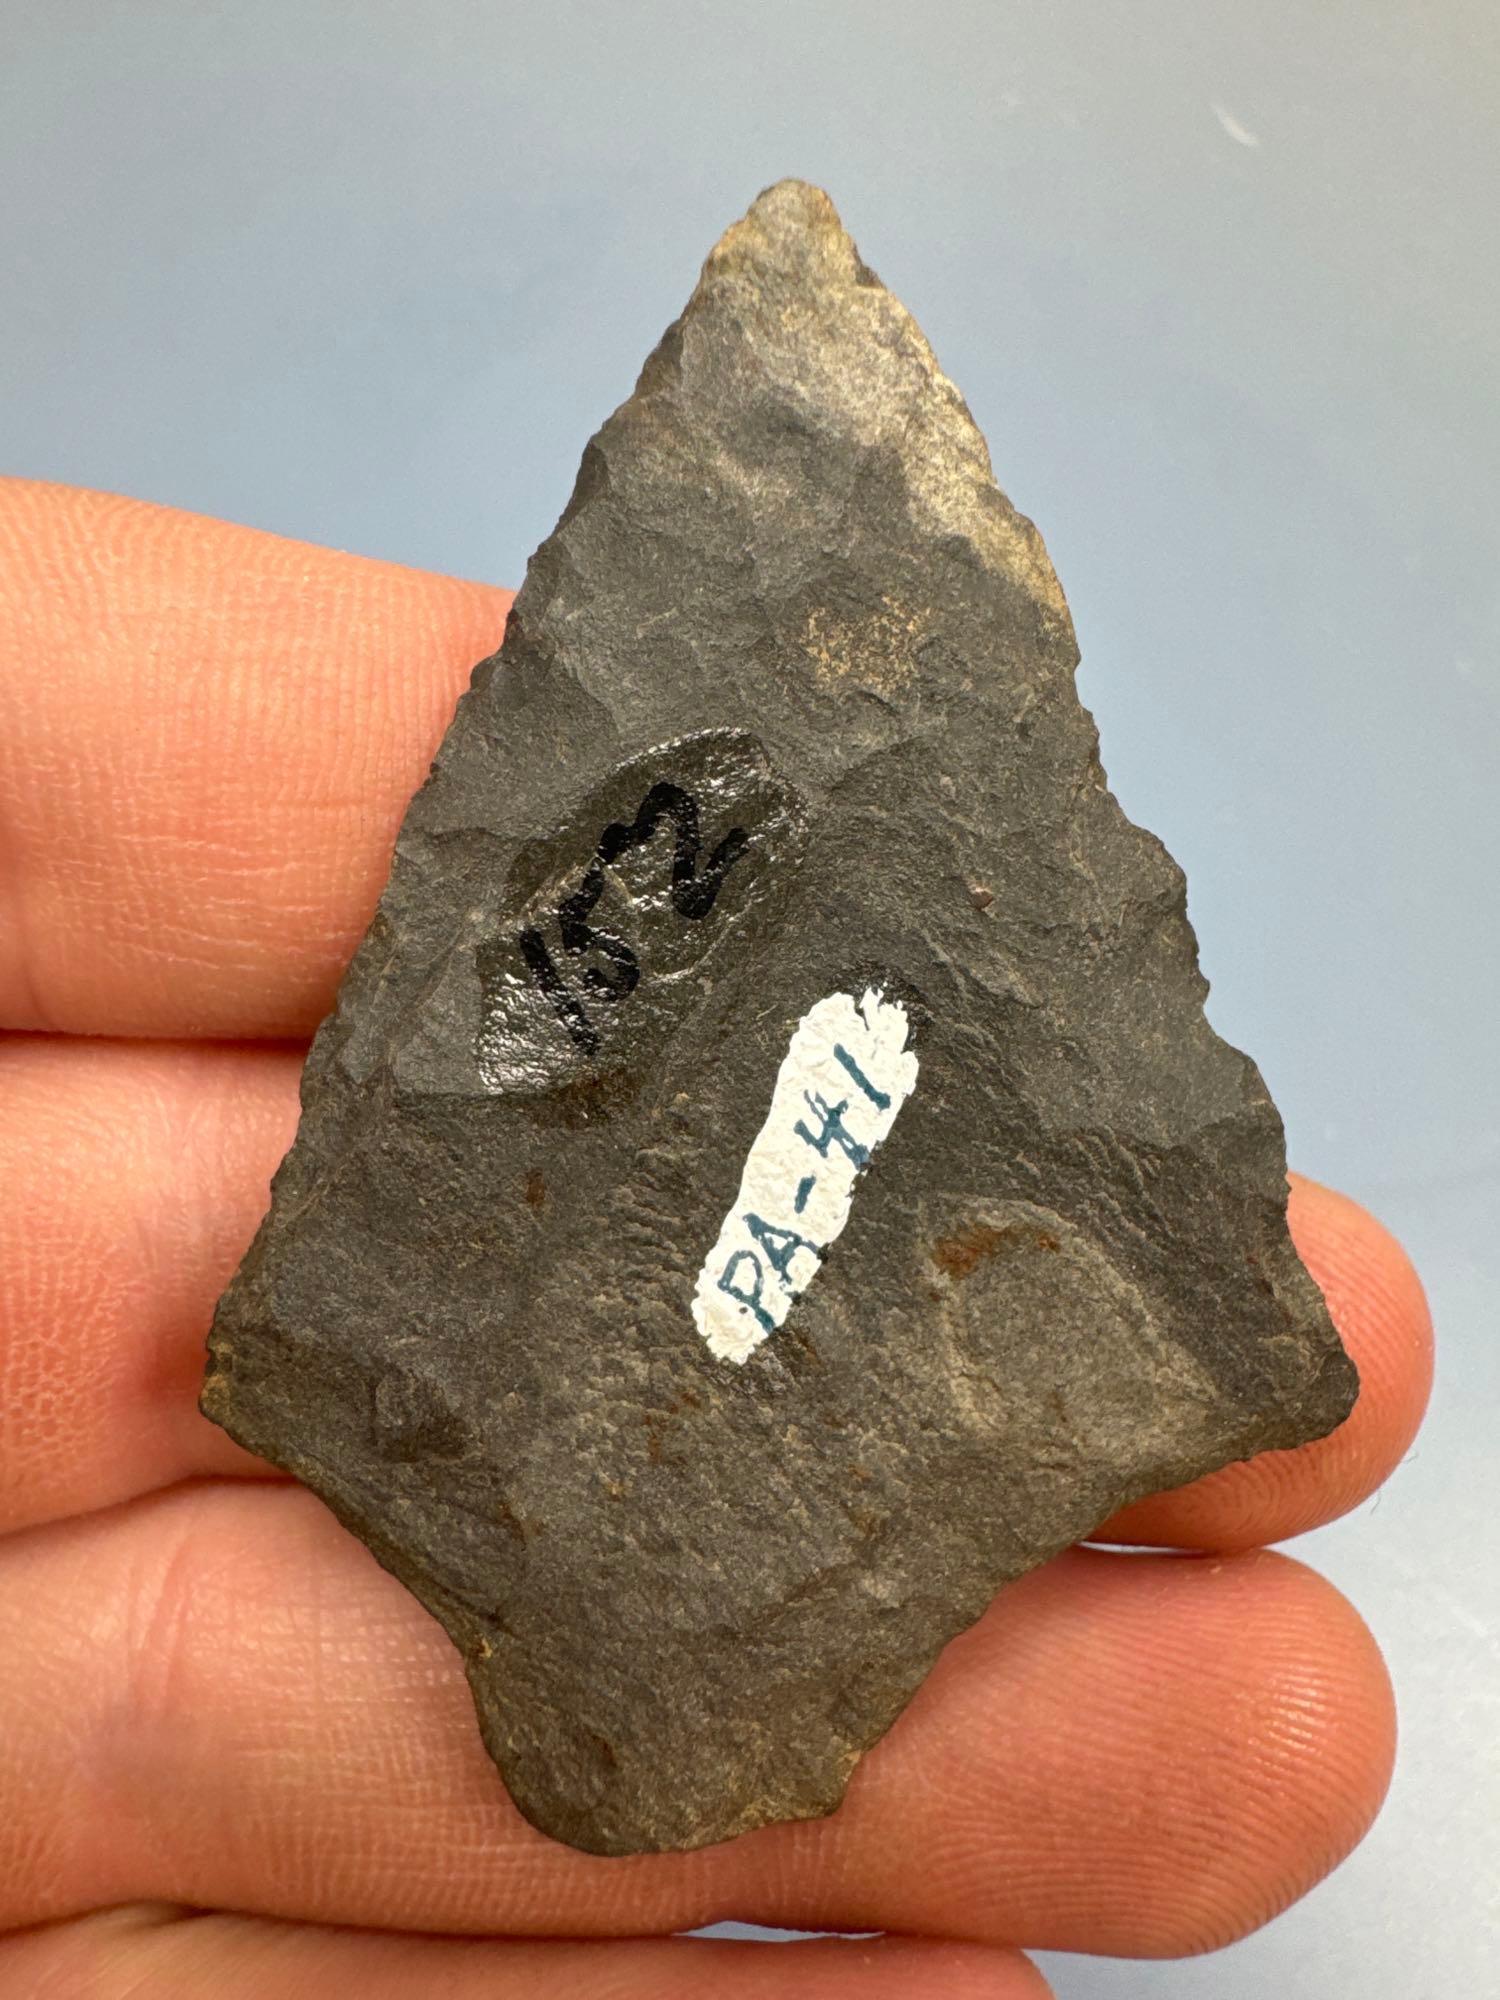 2-Tone, 2 1/4" Lehigh Broad Point, Found in Pennsylvania, Ex: Raymond Lemaster Collection